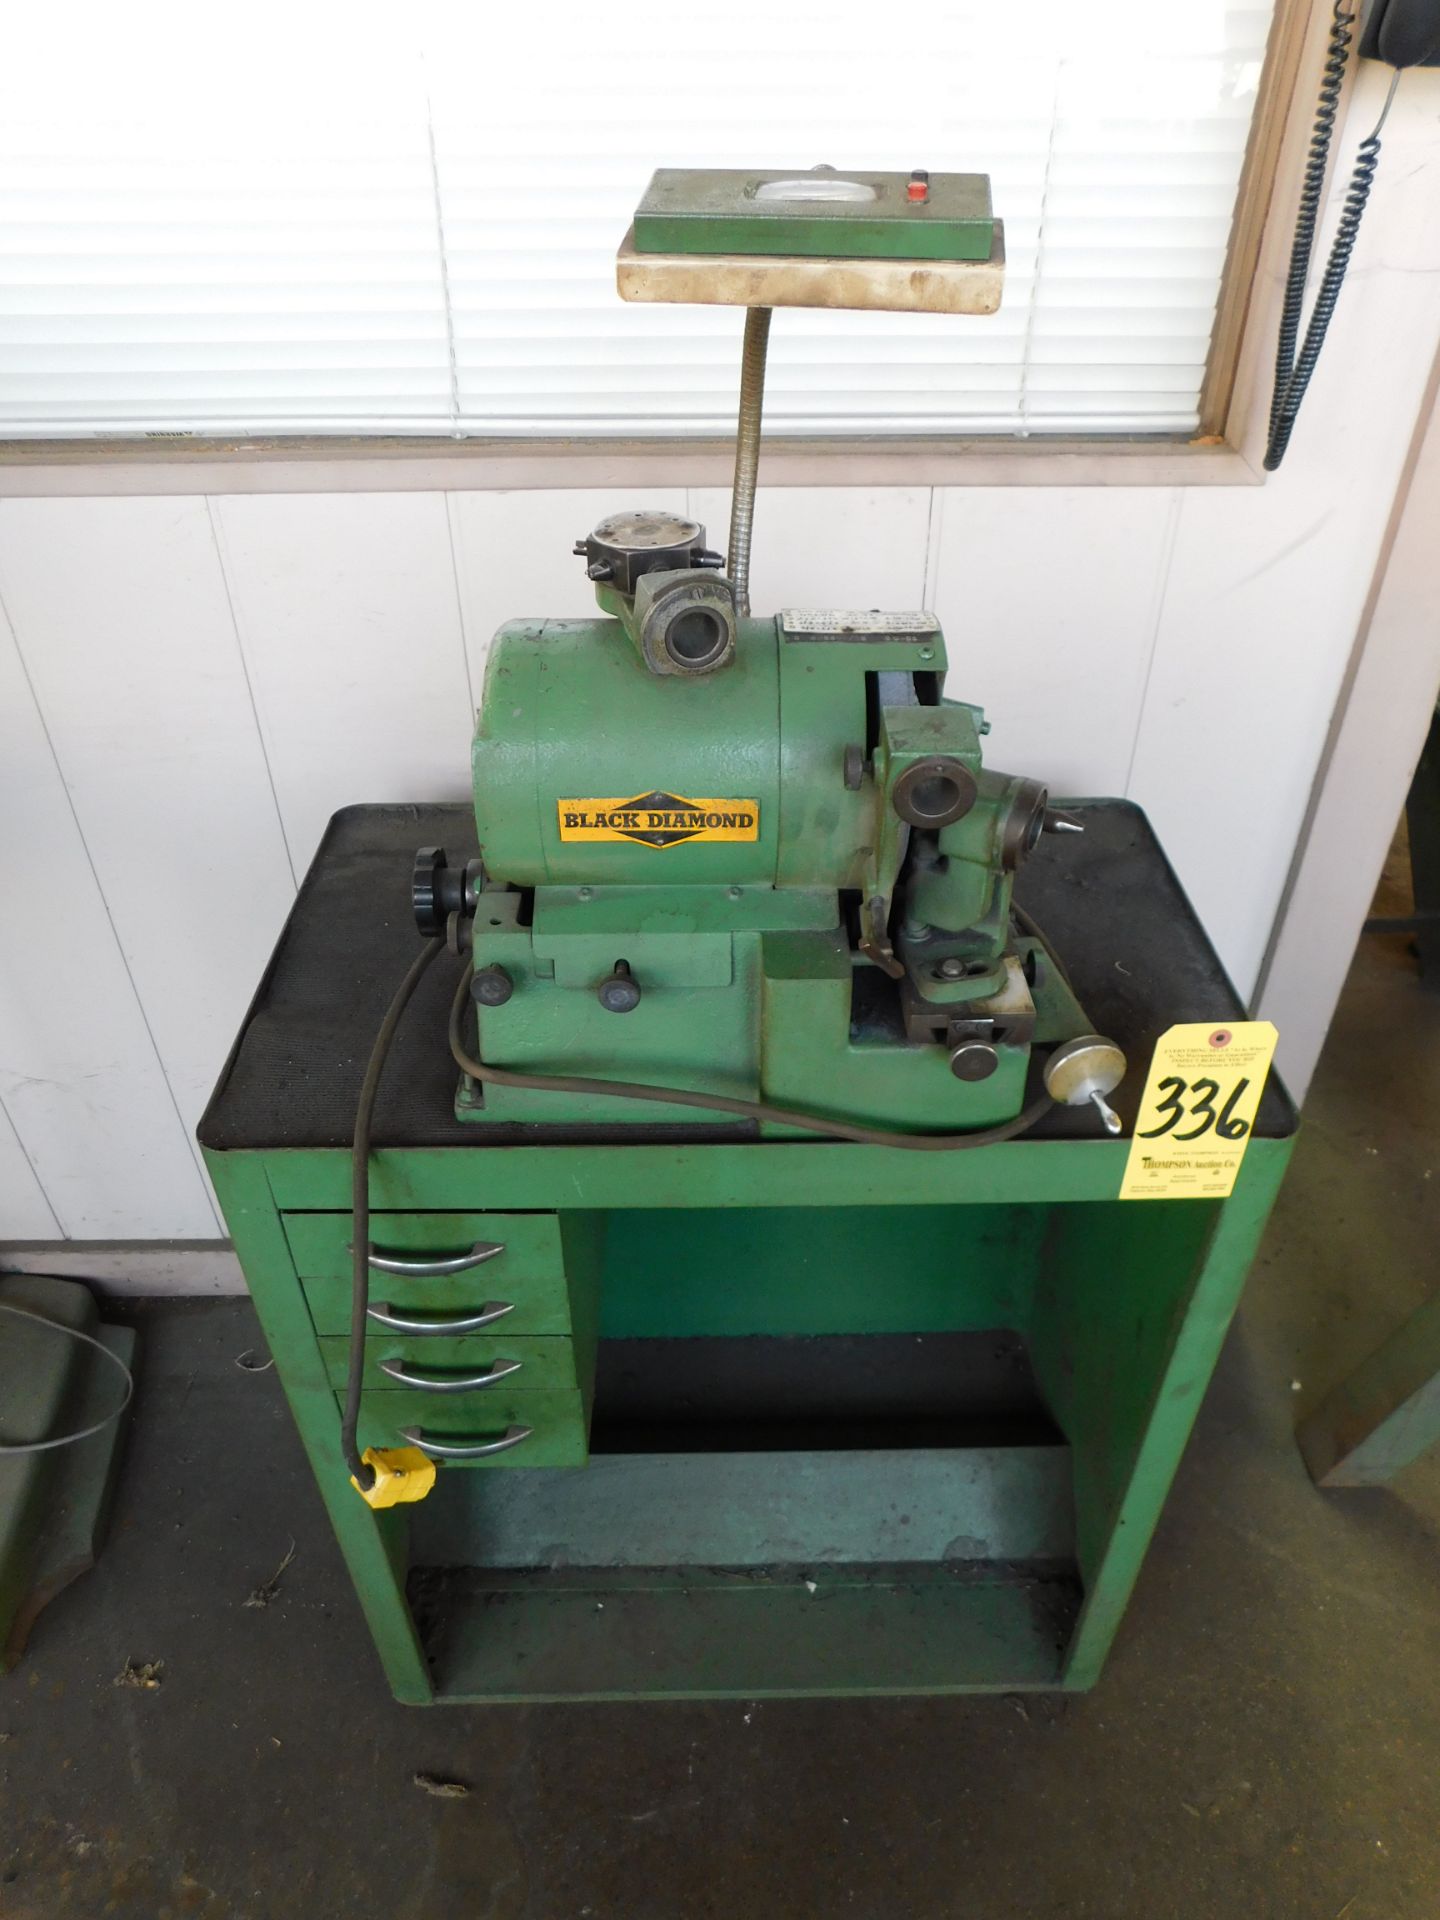 Black Diamond Model BW-75 Drill Grinder, s/n 24789, 1/16" - 1/2" Cap, with Cabinet and Collets